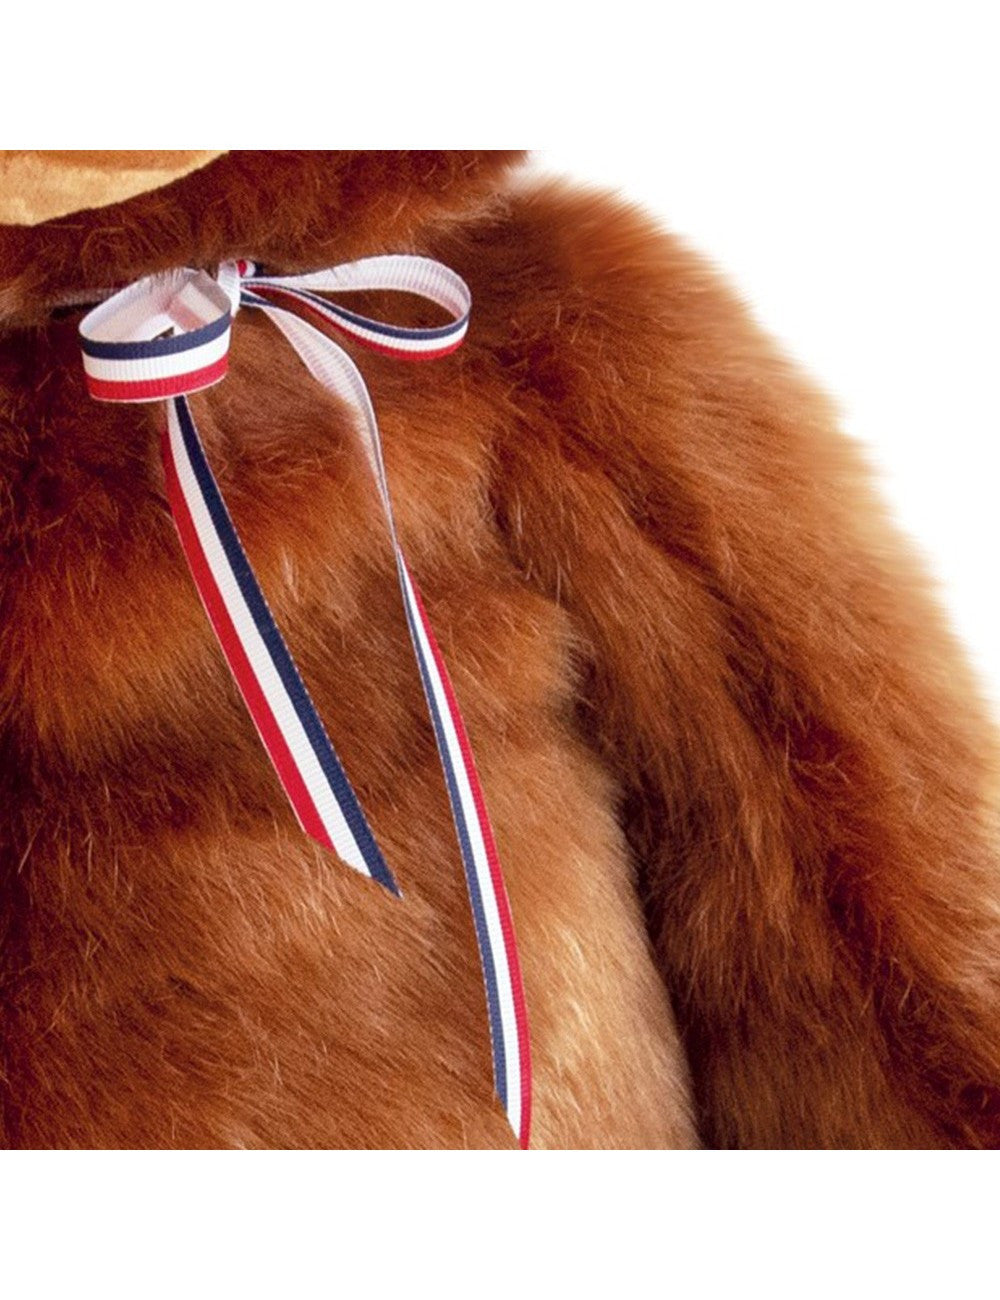 The French Bear 65cm "Caramel" Mailou Tradition